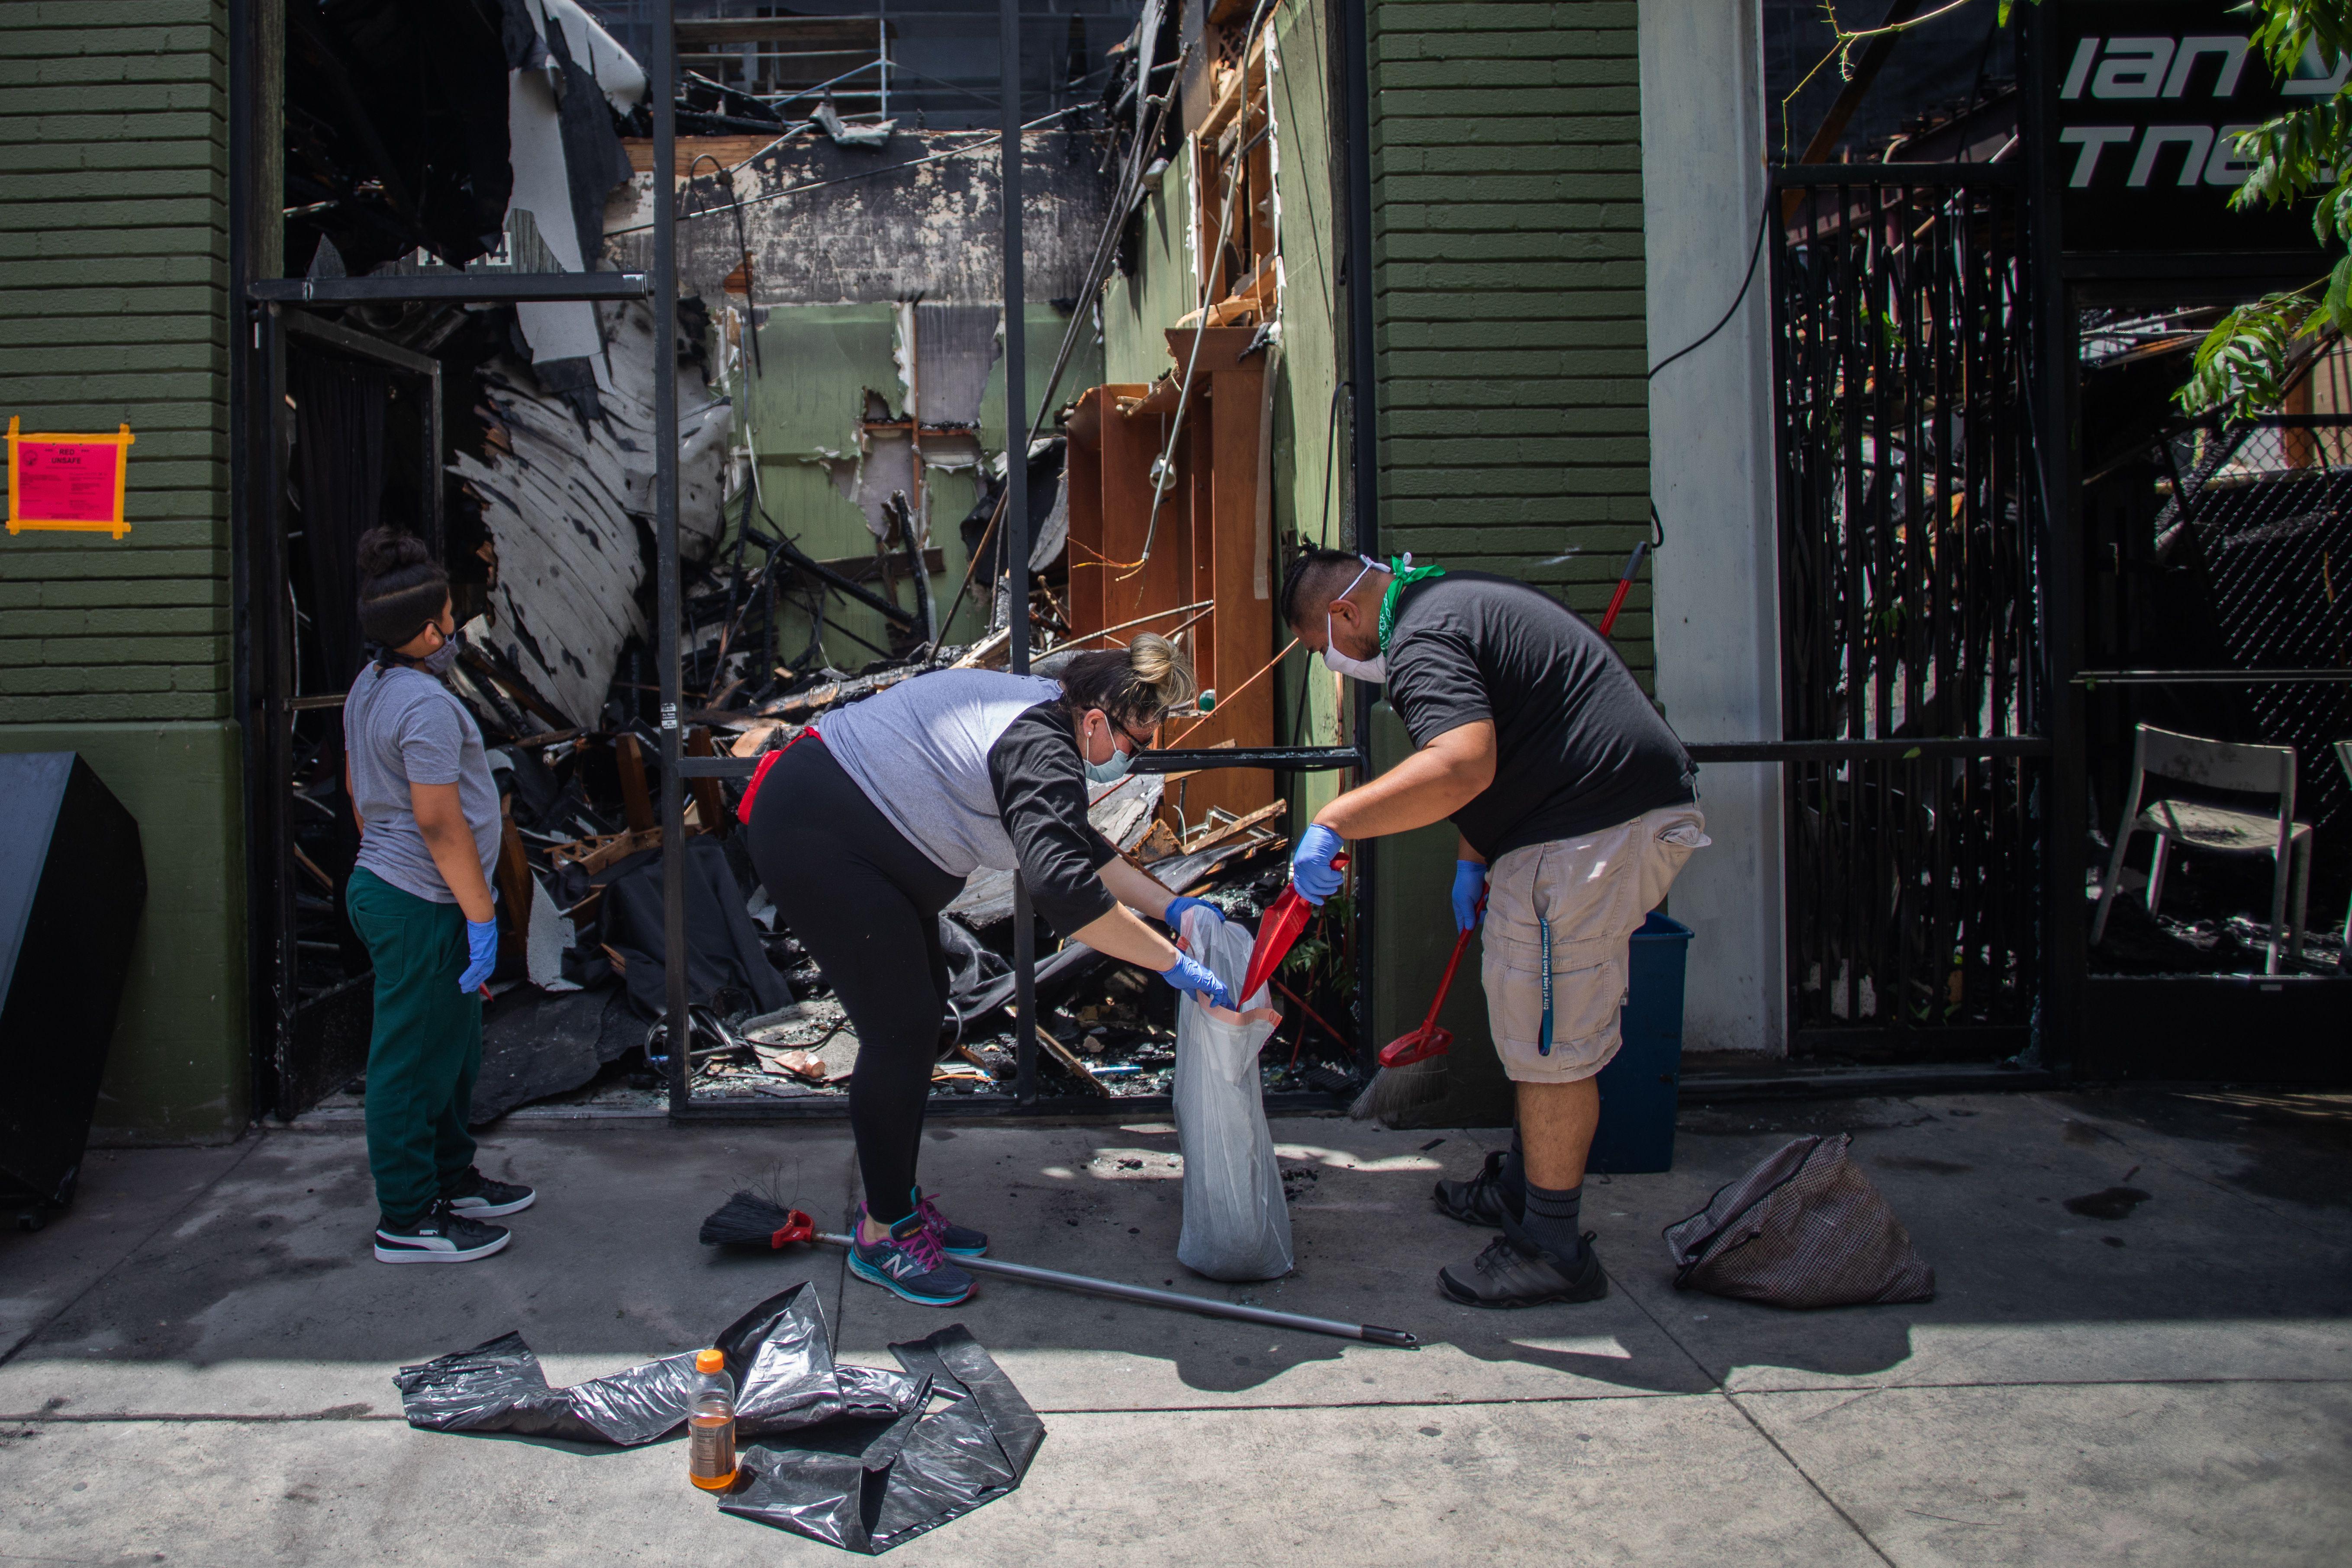 People wearing masks and gloves sweep debris into a garbage bag and survey the damage